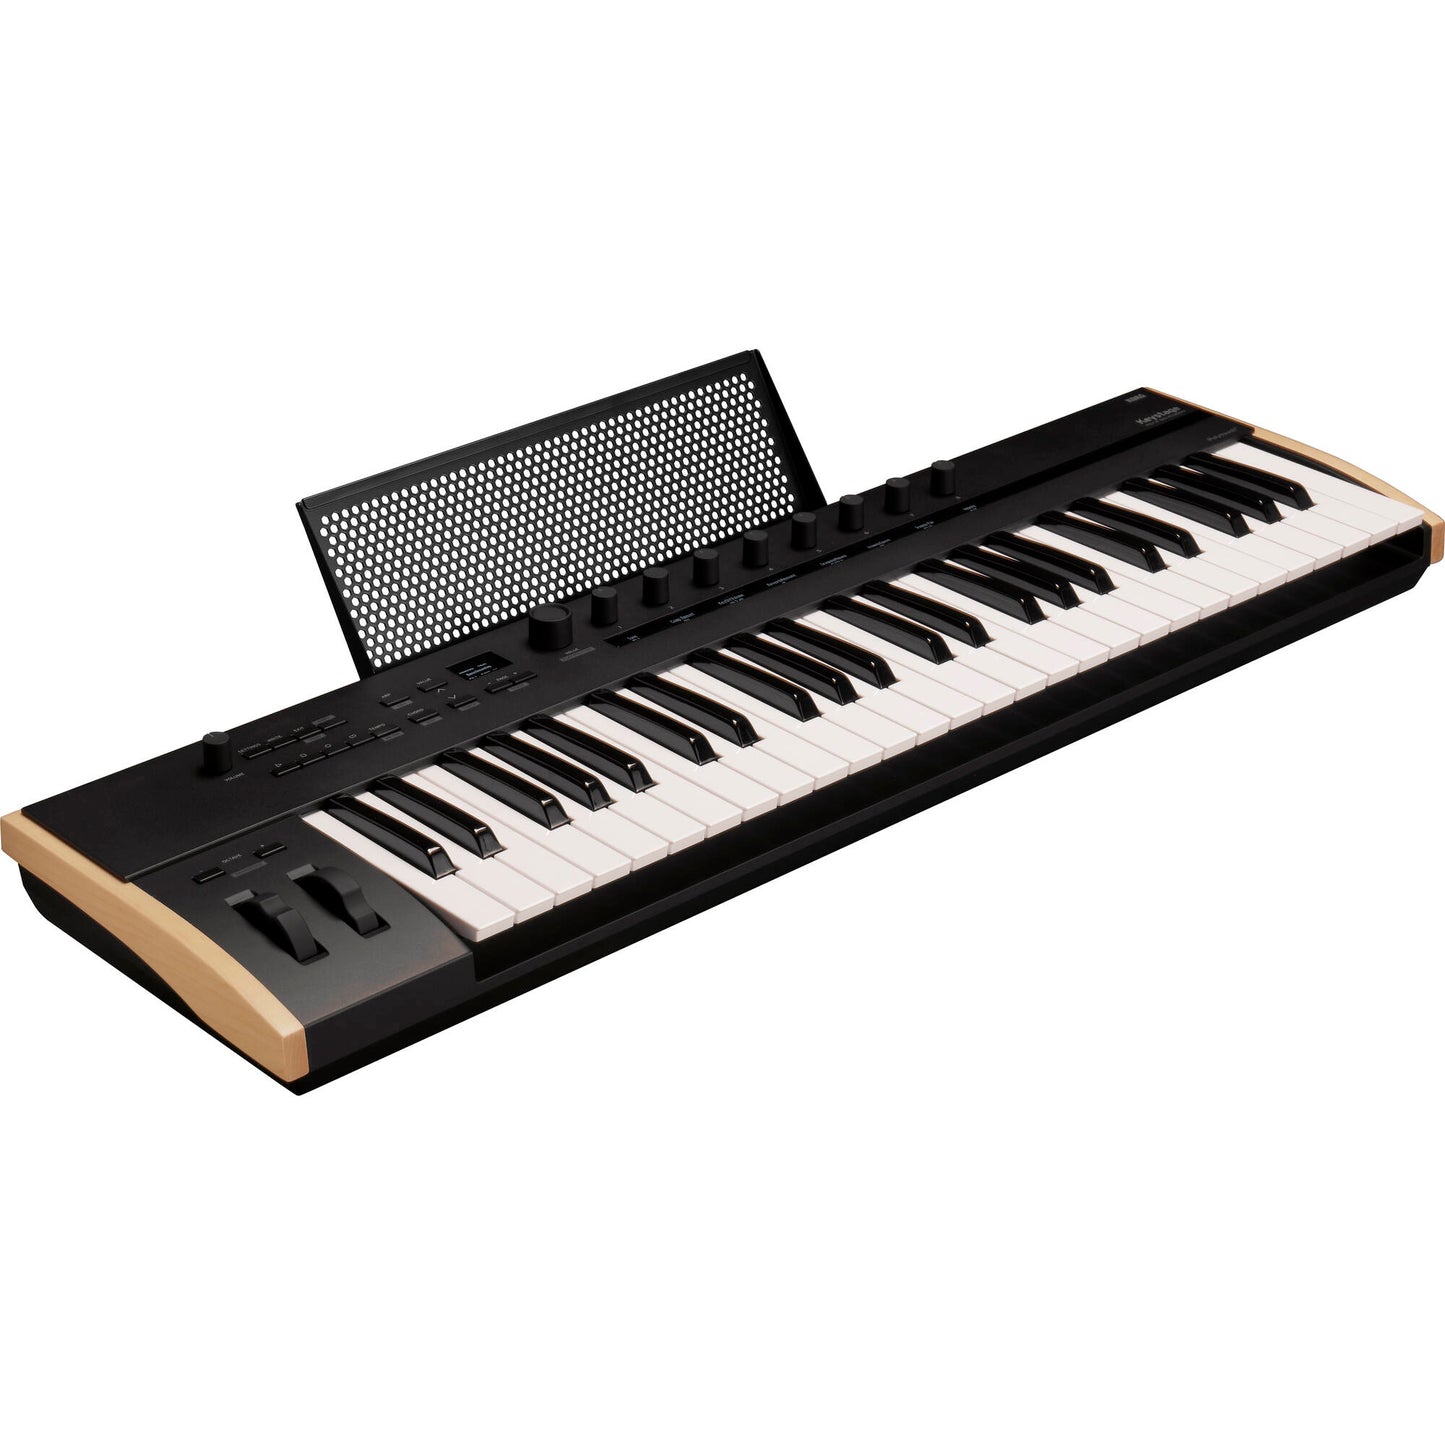 Korg Keystage 49 MIDI Controller with Polyphonic Aftertouch